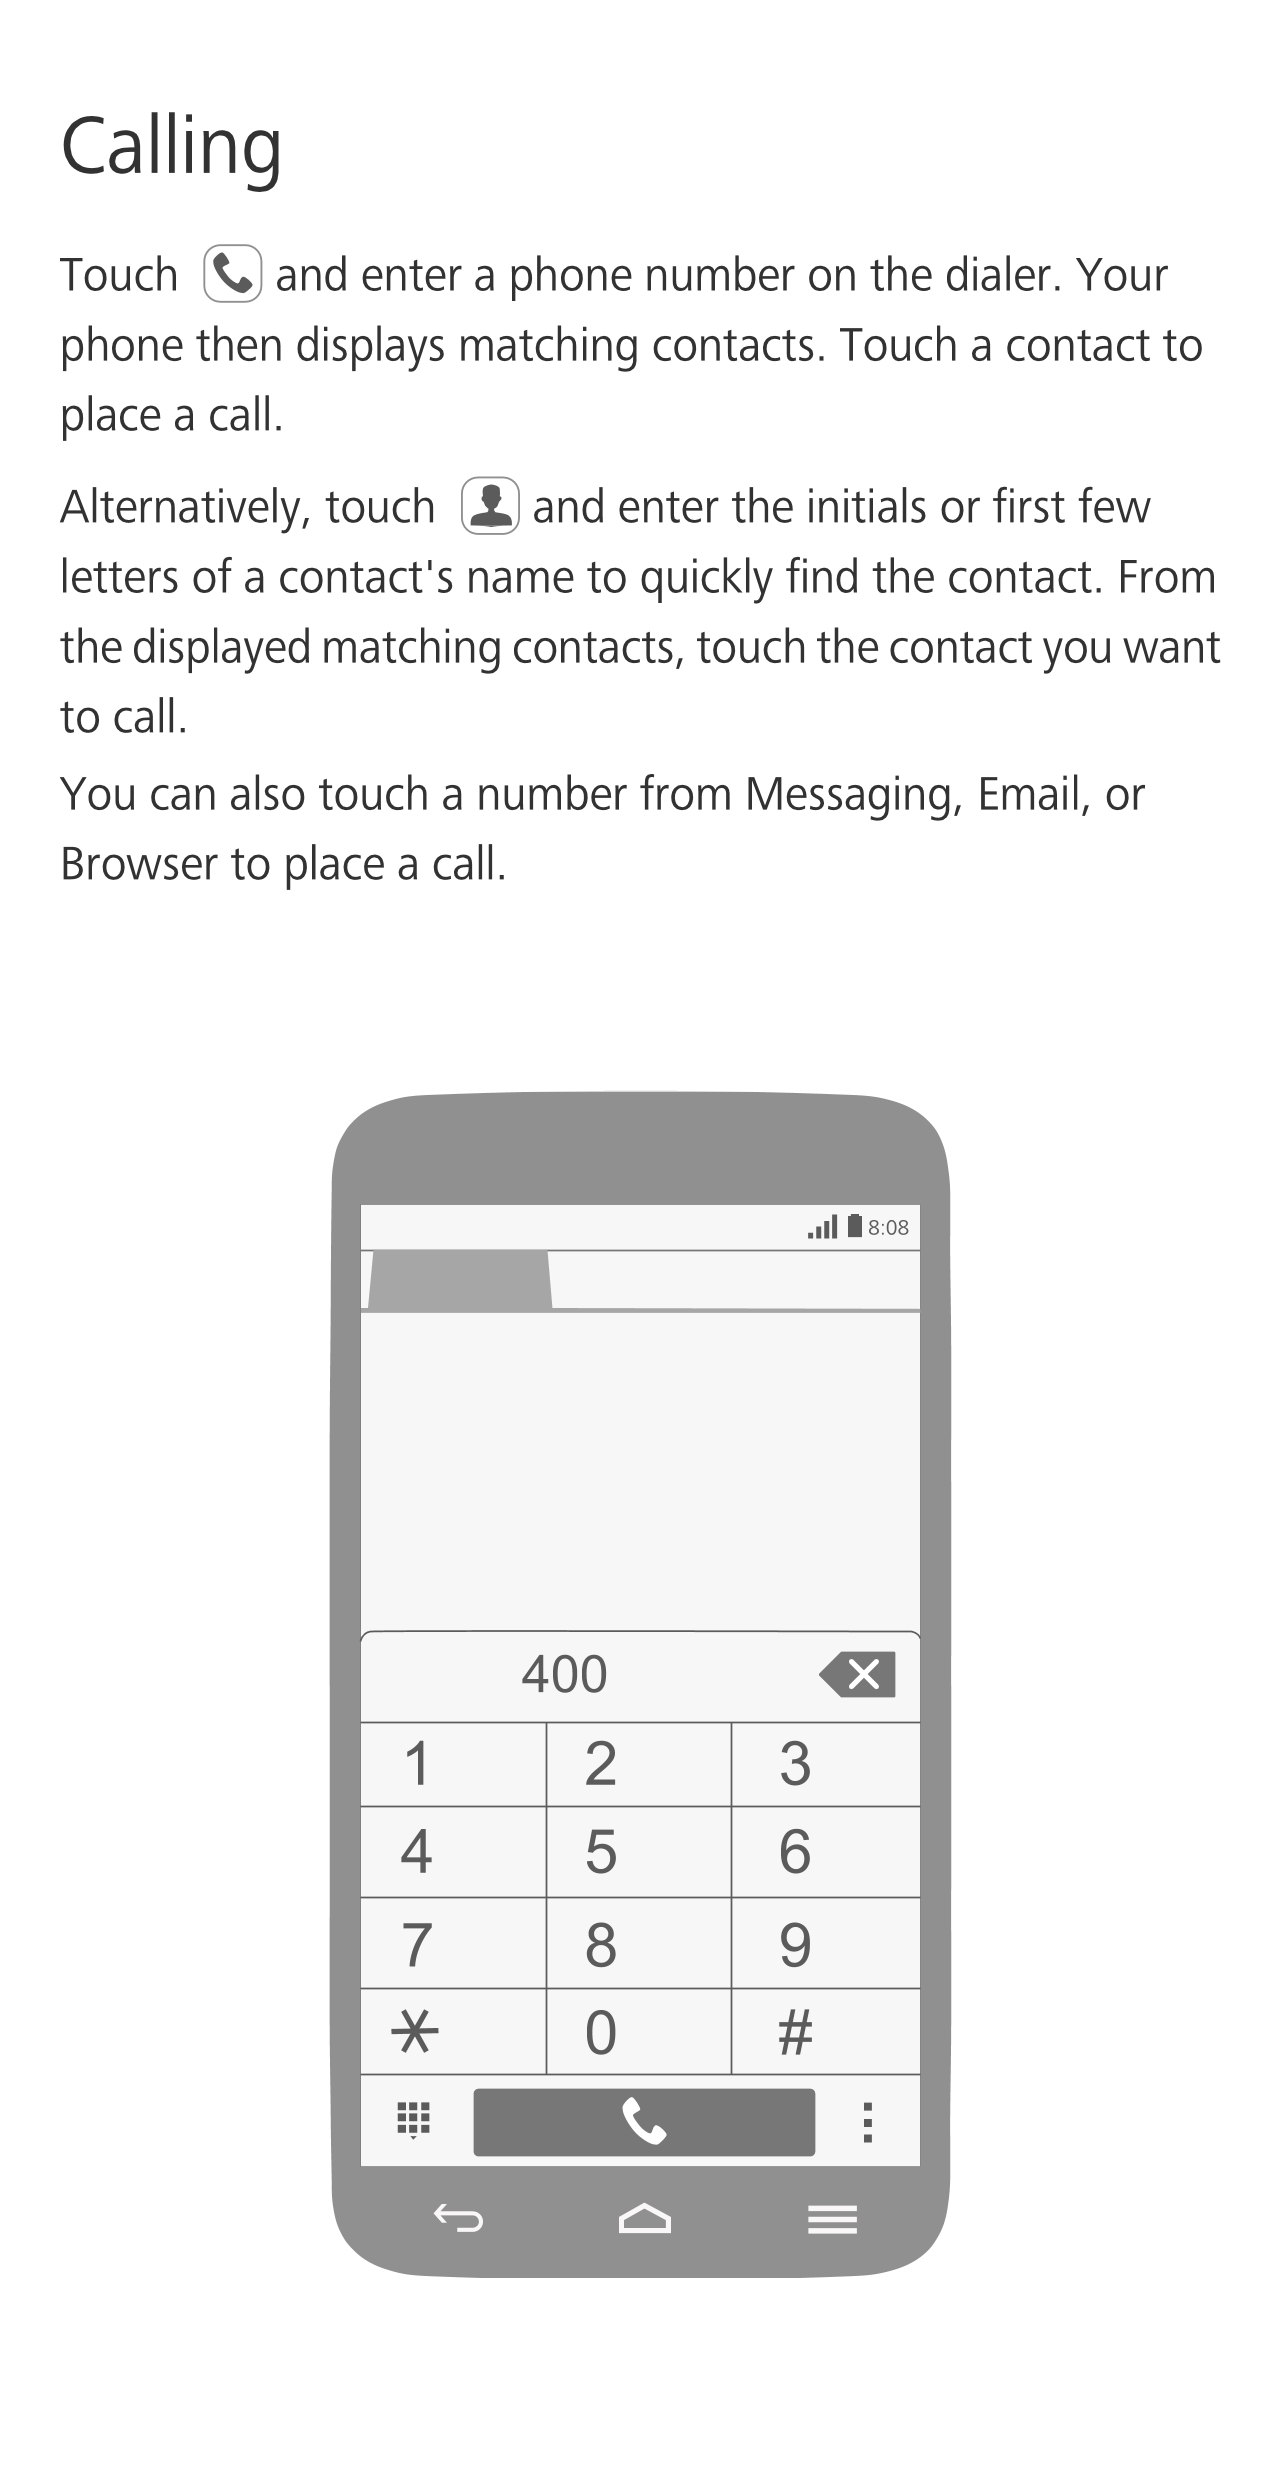 Calling
Touch  and enter a phone number on the dialer. Your 
phone then displays matching contacts. Touch a contact to 
place a 